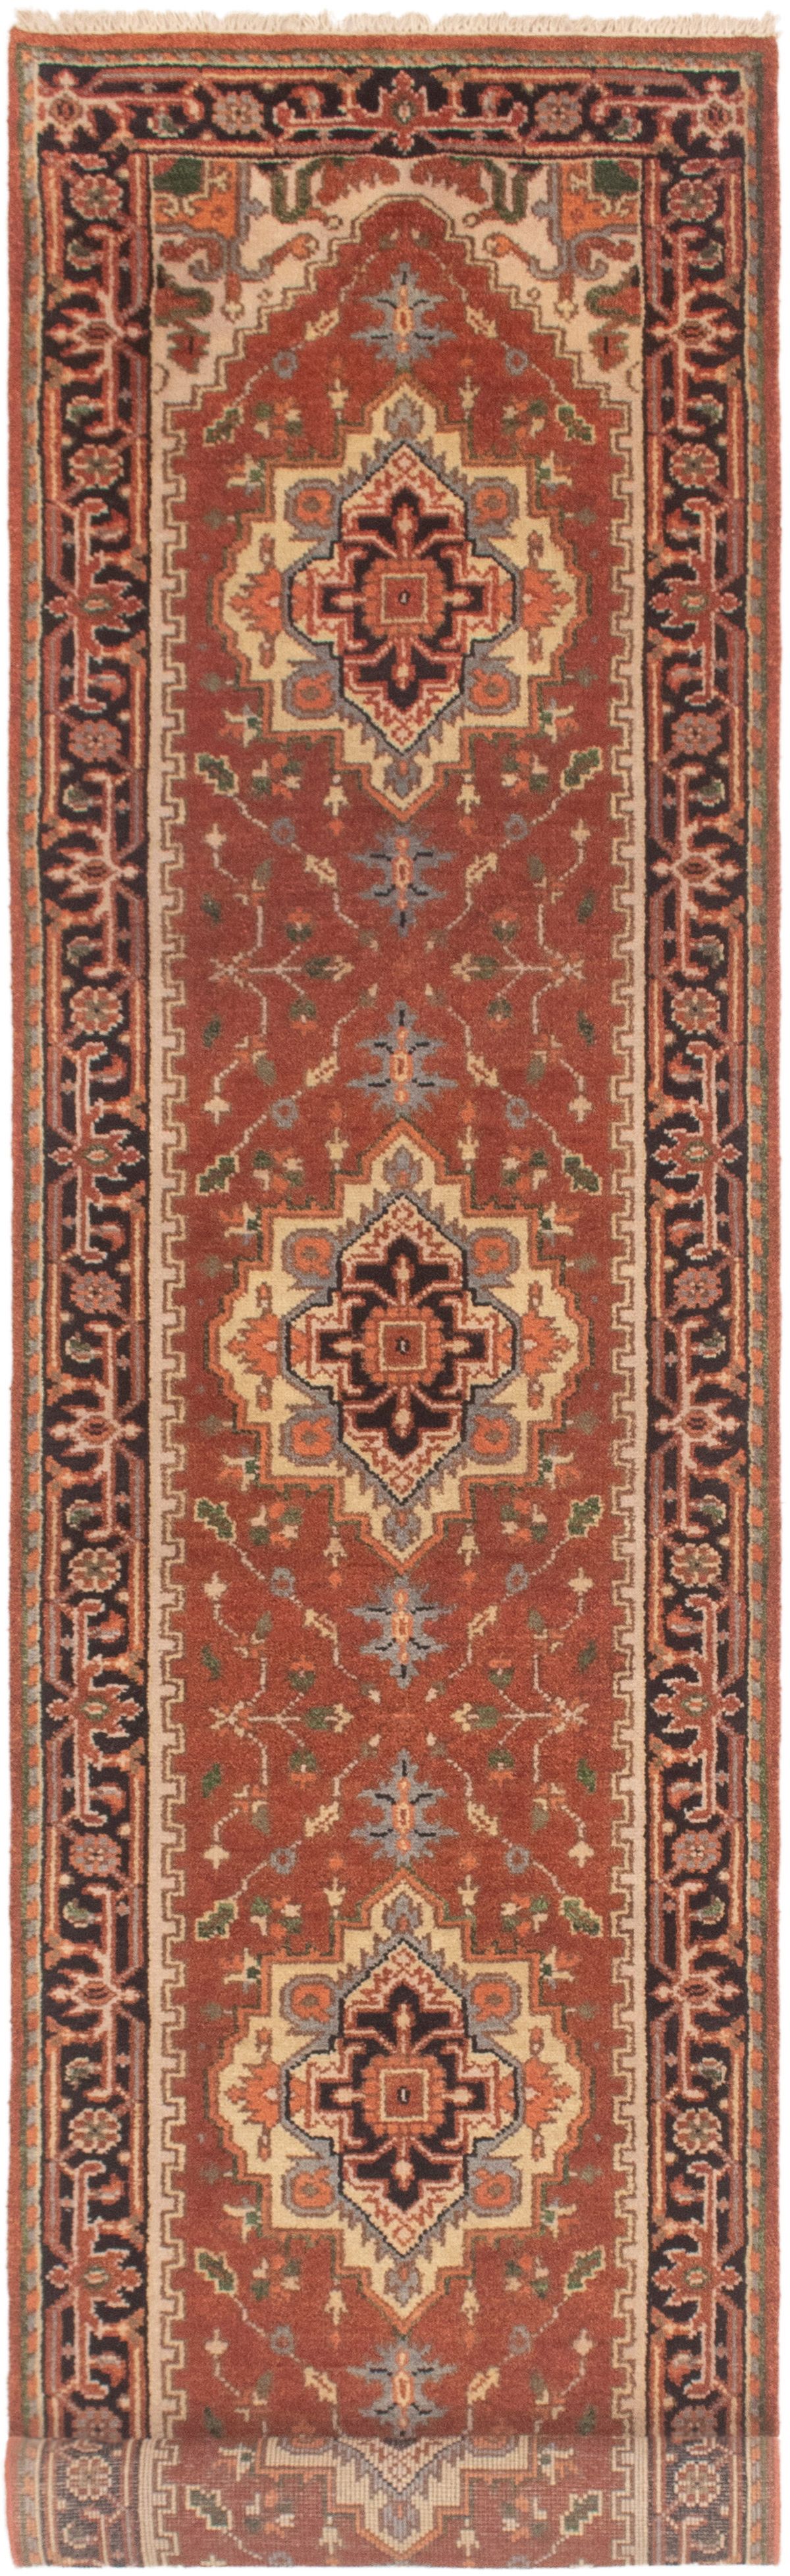 Hand-knotted Serapi Heritage Dark Copper Wool Rug 2'6" x 11'11"  Size: 2'6" x 11'11"  